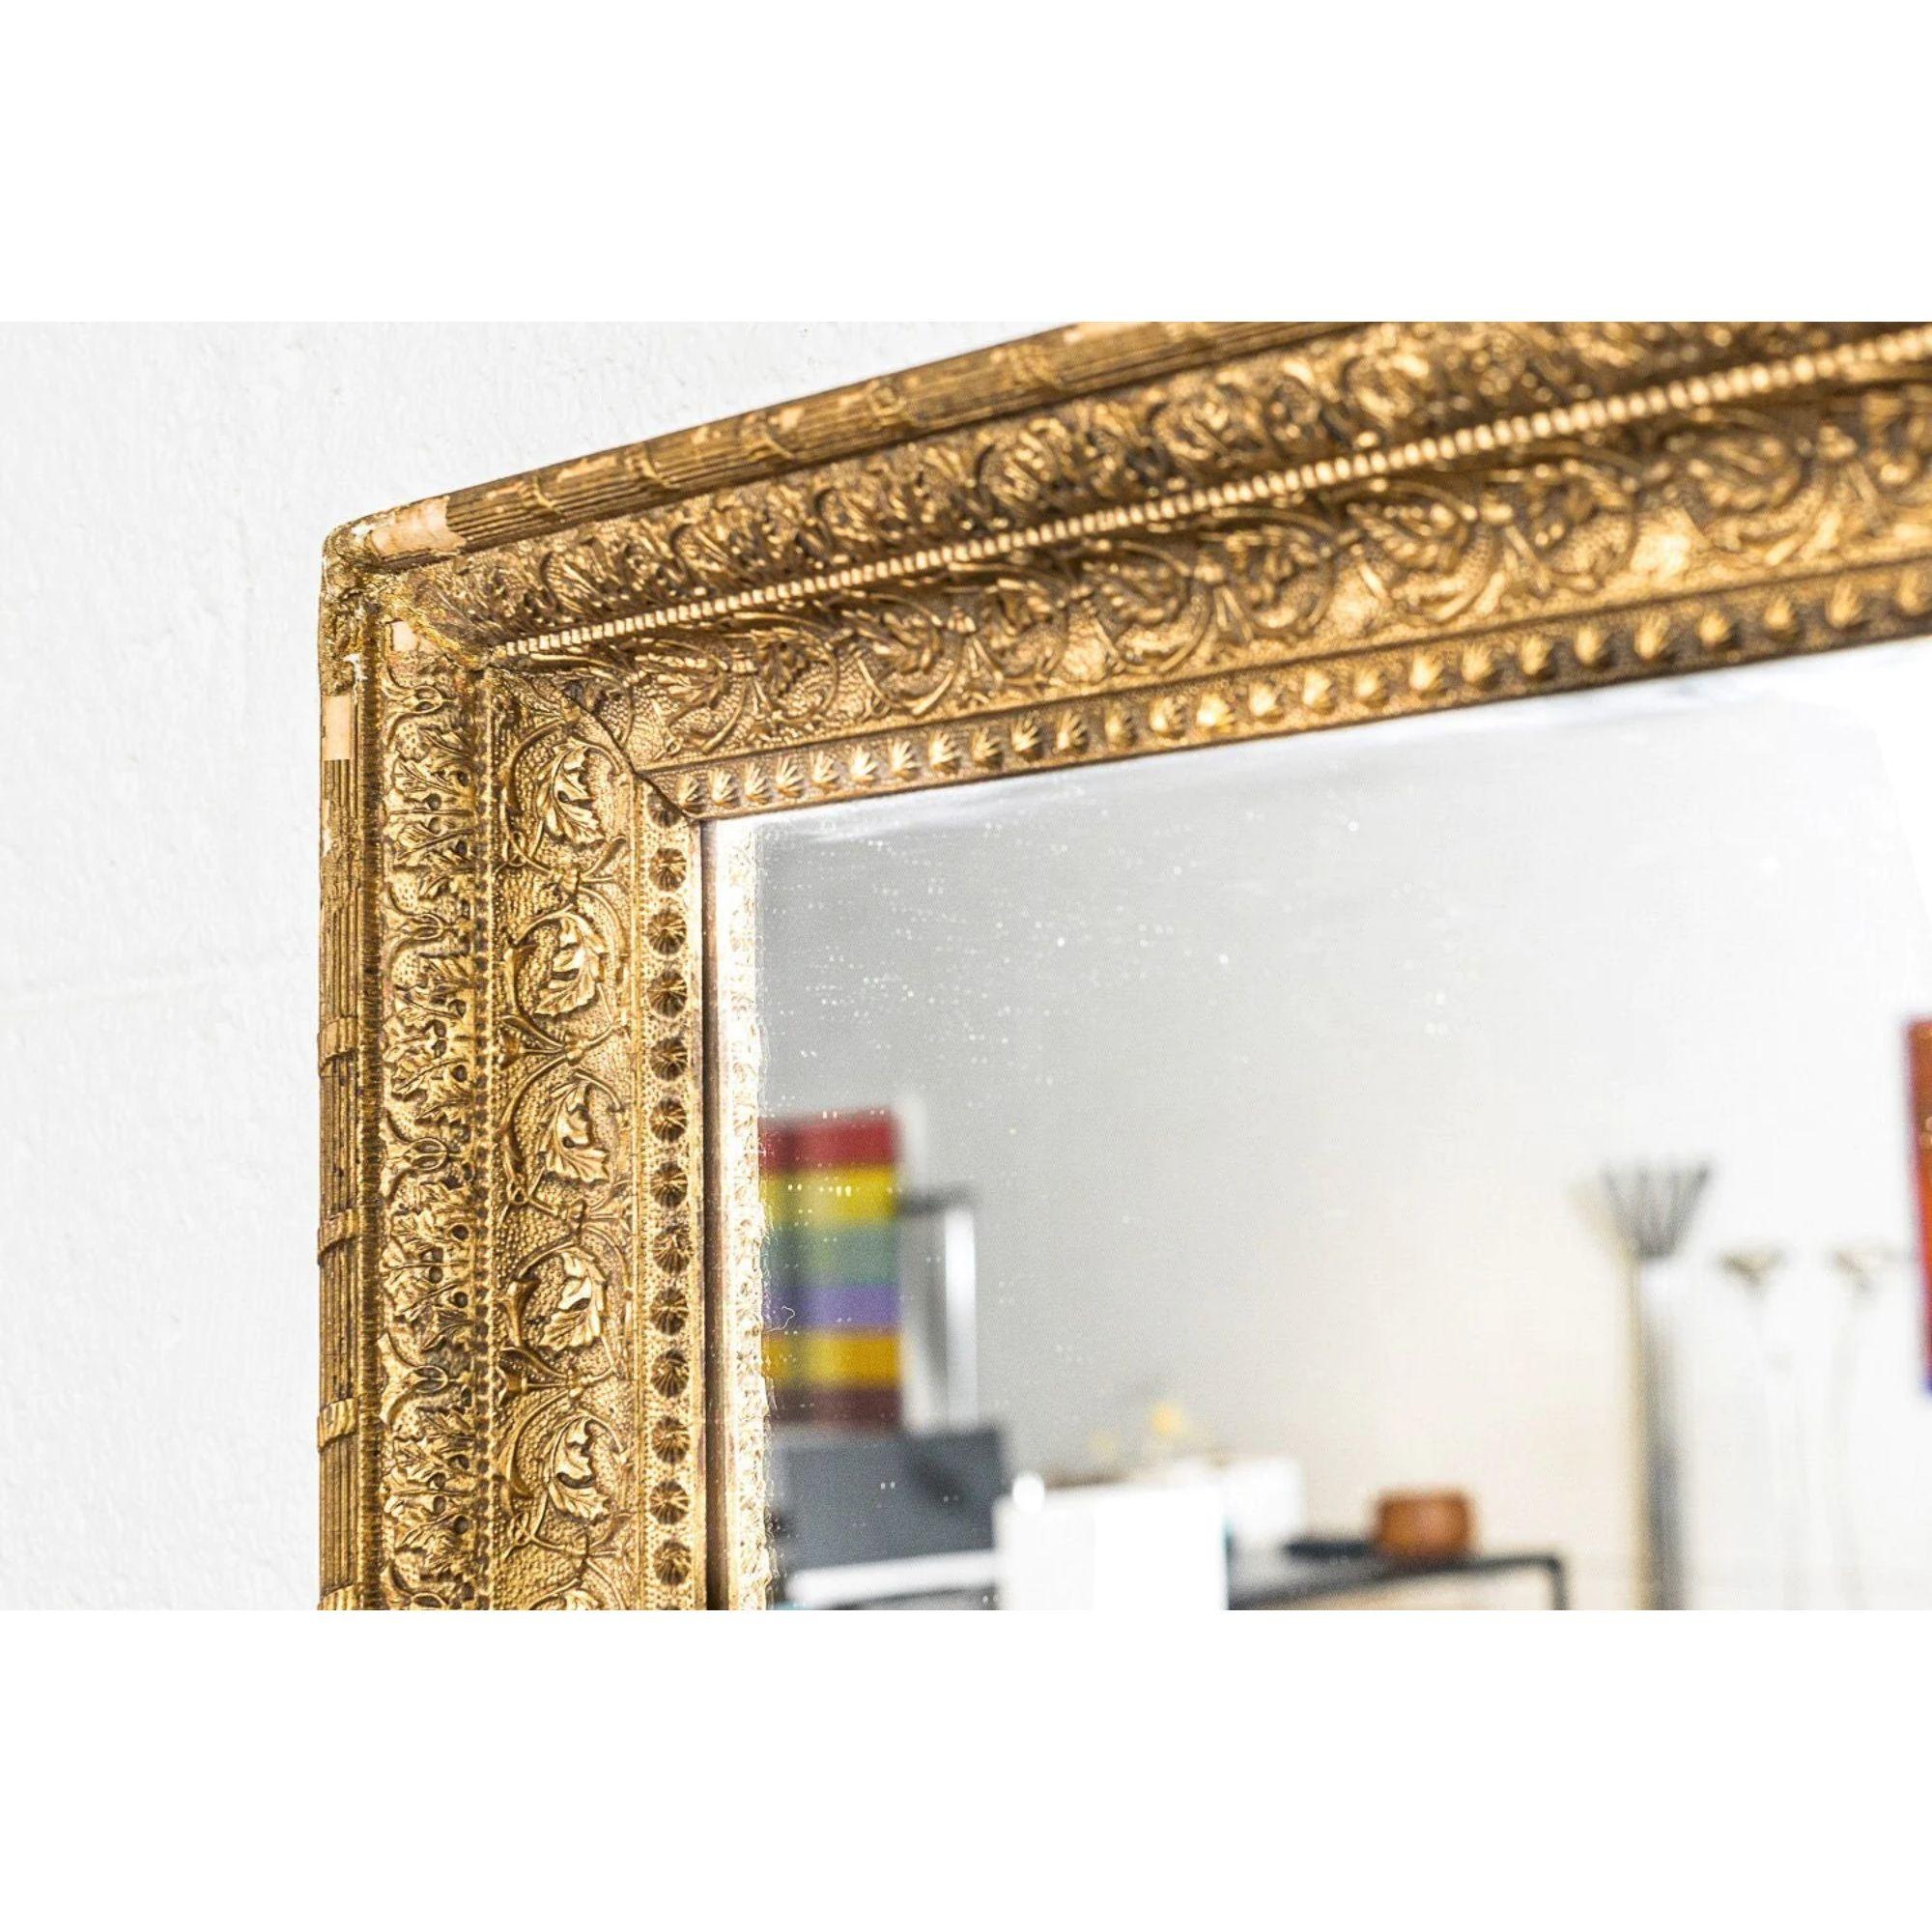 Unknown Vintage Antique Ornate Gold Decorative Hanging Wall Mirror For Sale